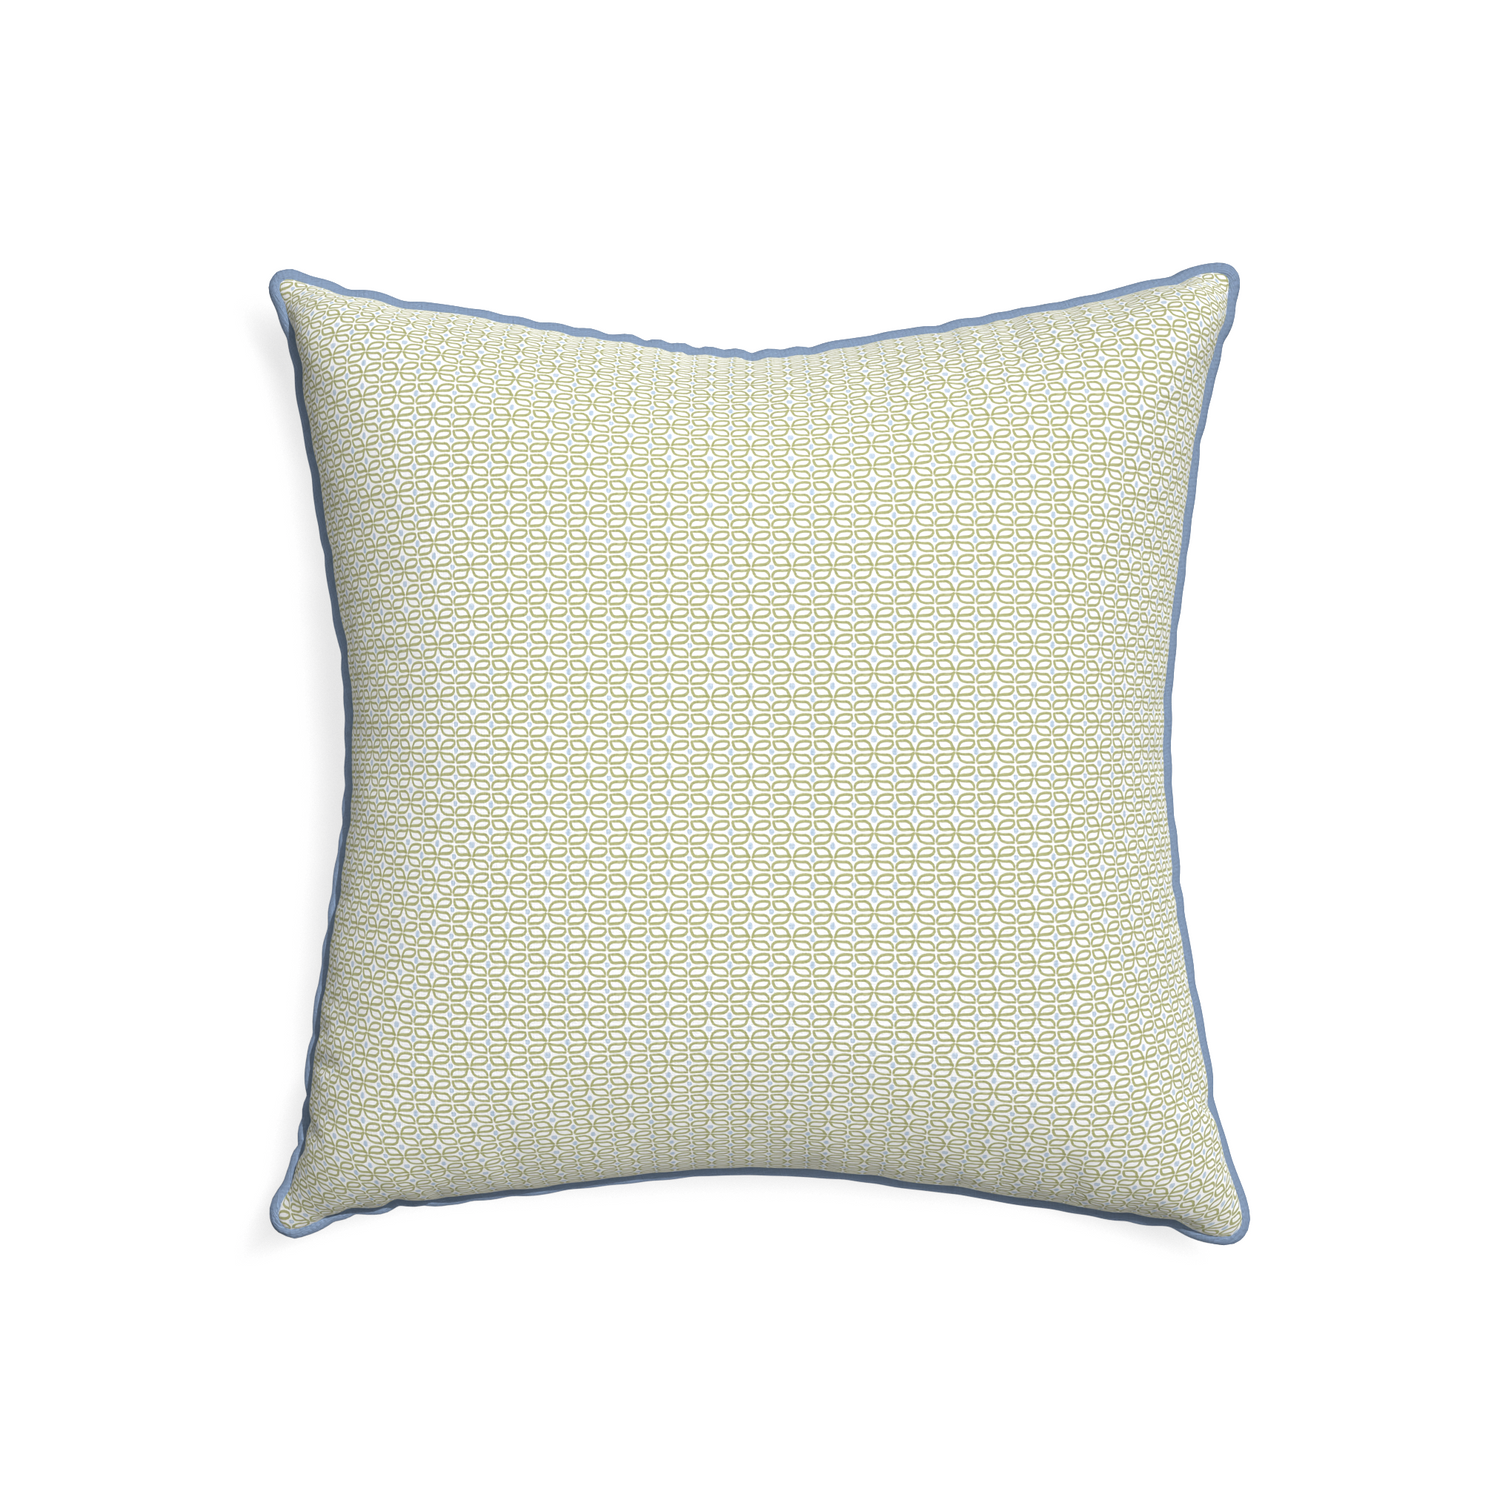 22-square loomi moss custom moss green geometricpillow with sky piping on white background